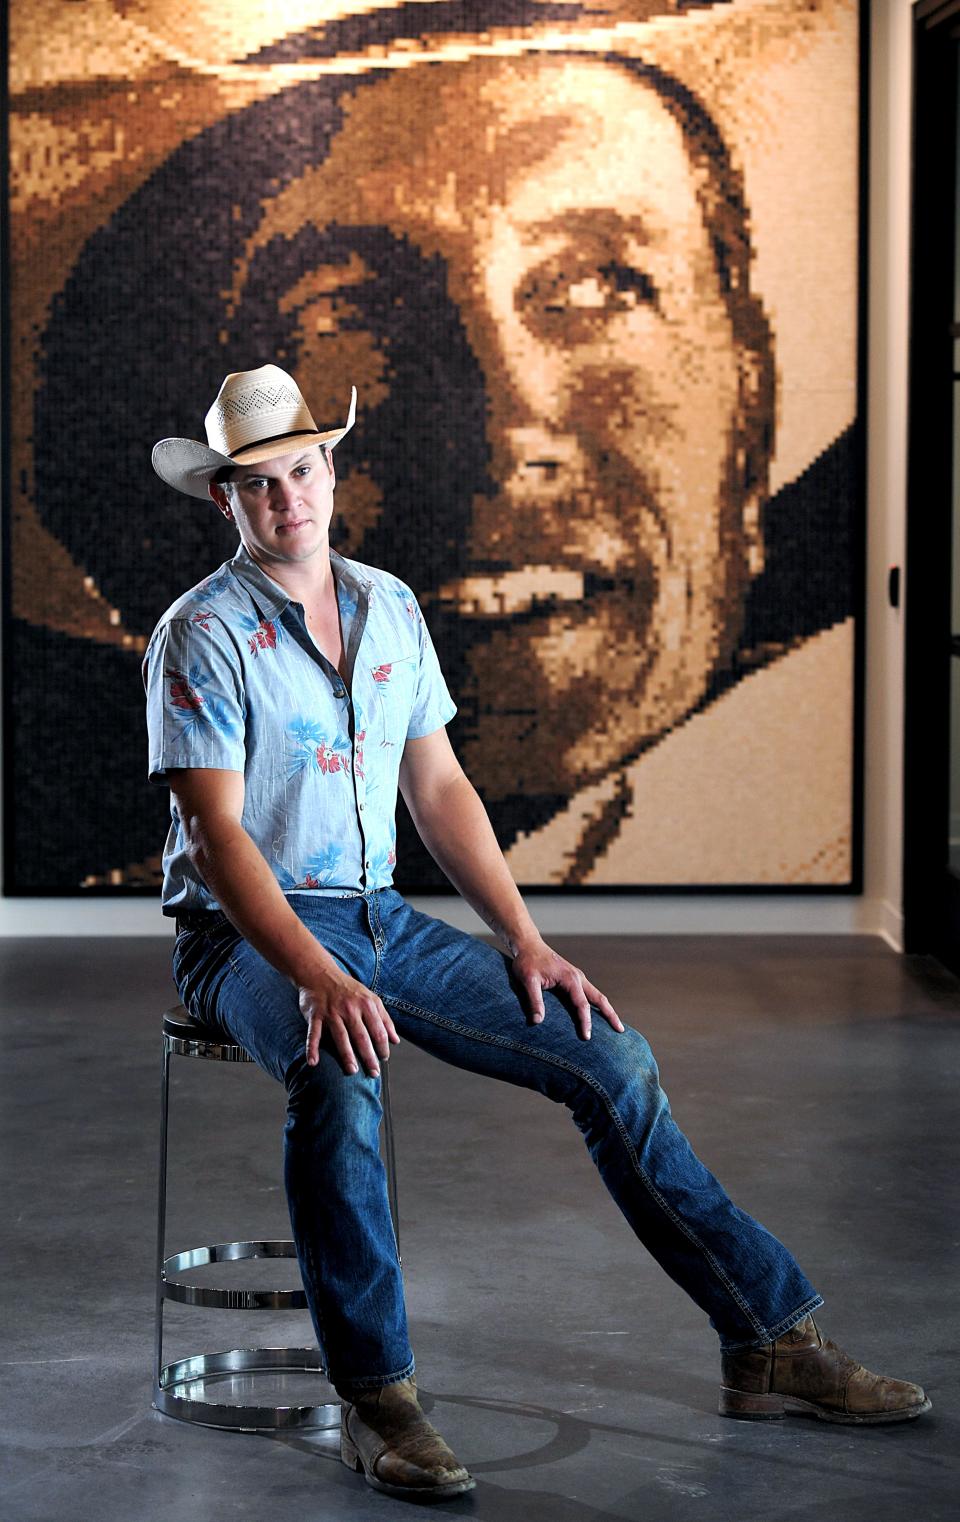 When Jon Pardi was young, he told his preschool teacher that his name was George Strait.